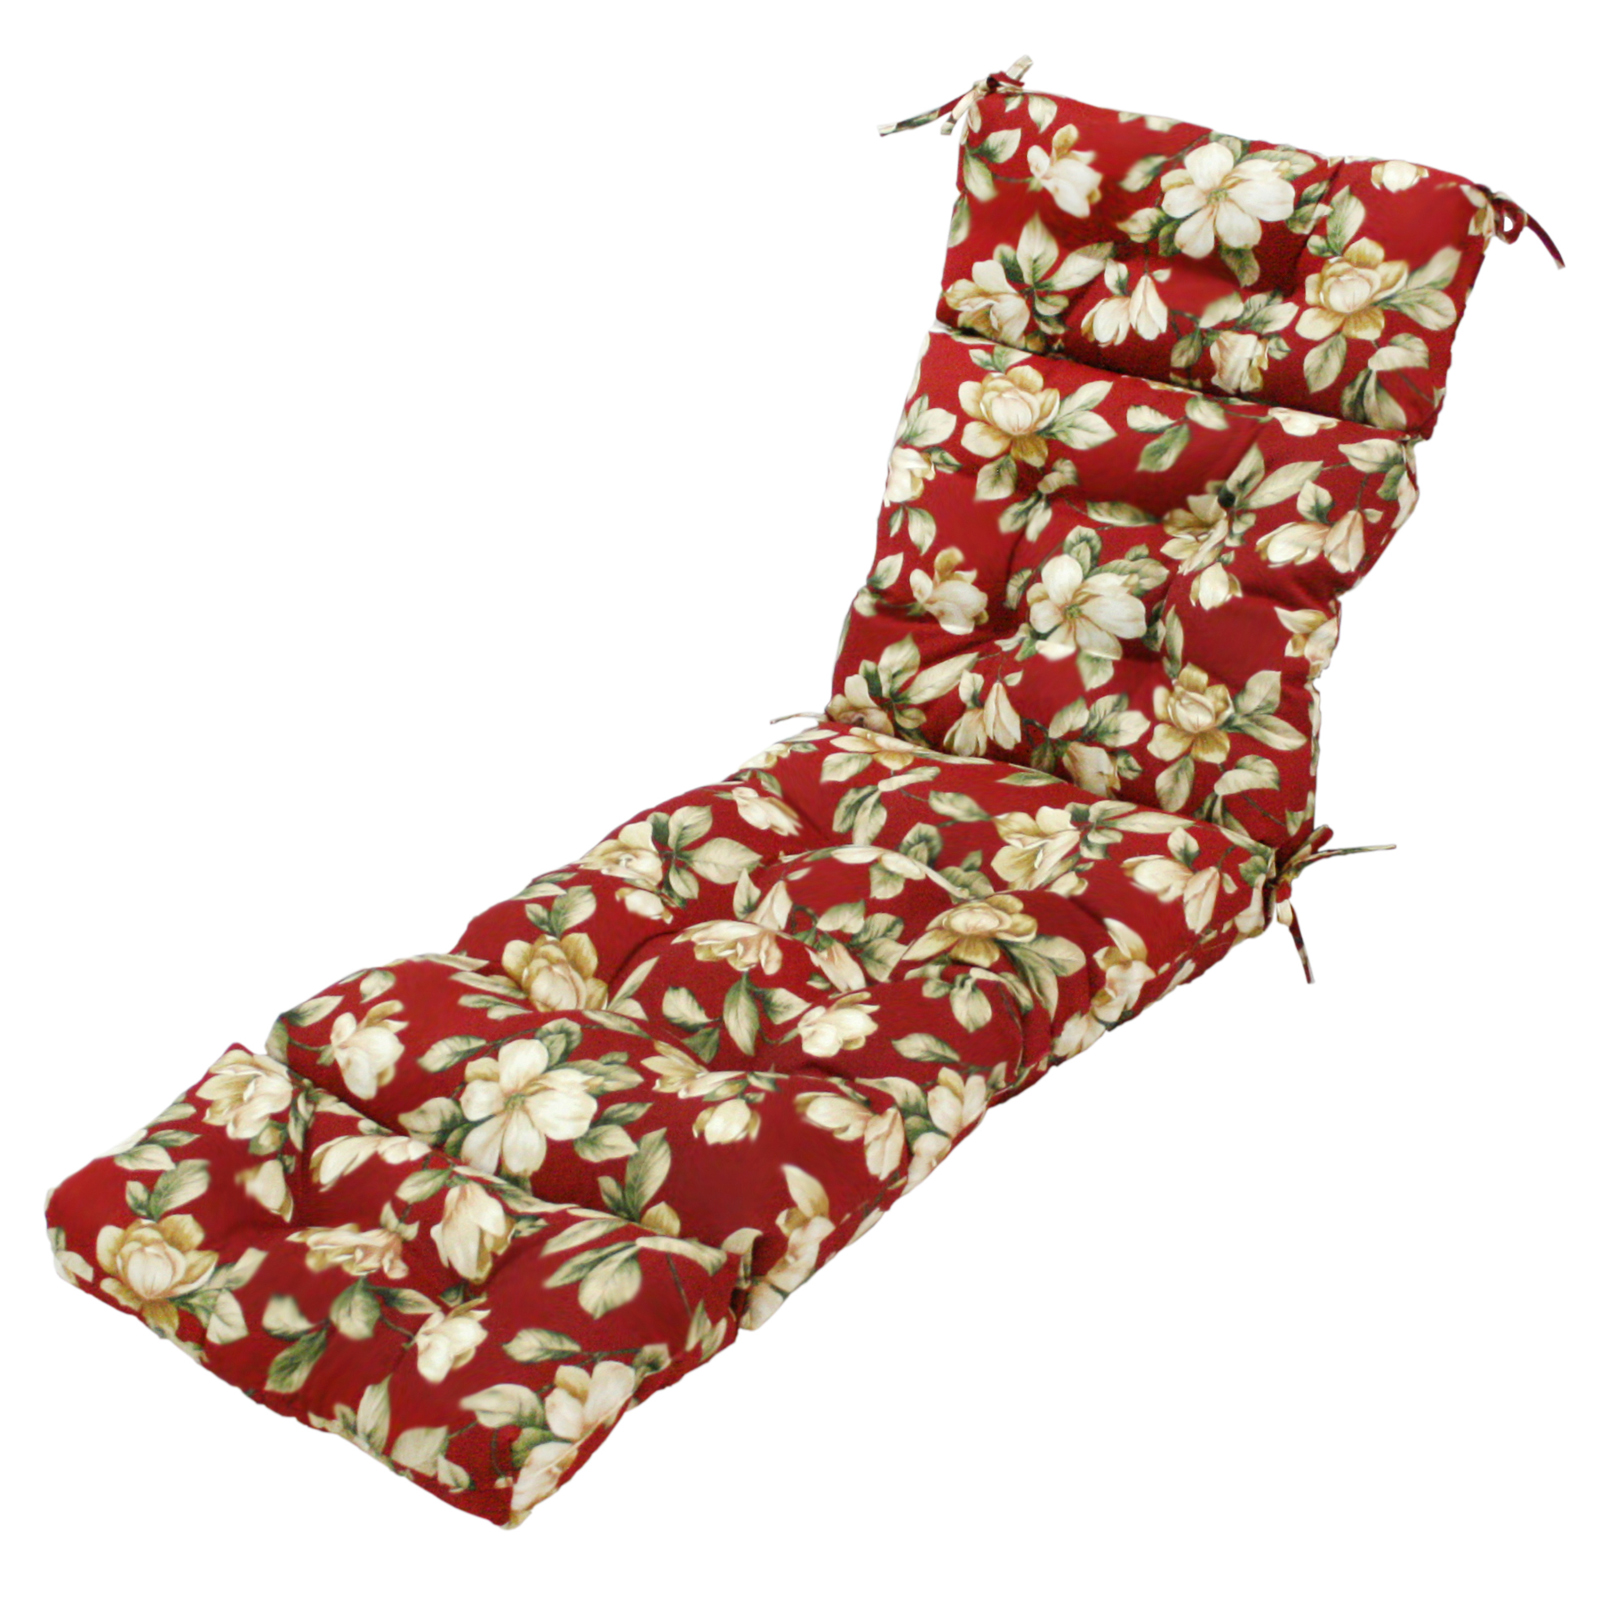 Greendale Home Fashions 72 inch Patio Chaise Lounger Cushion, Shelby Pompeii